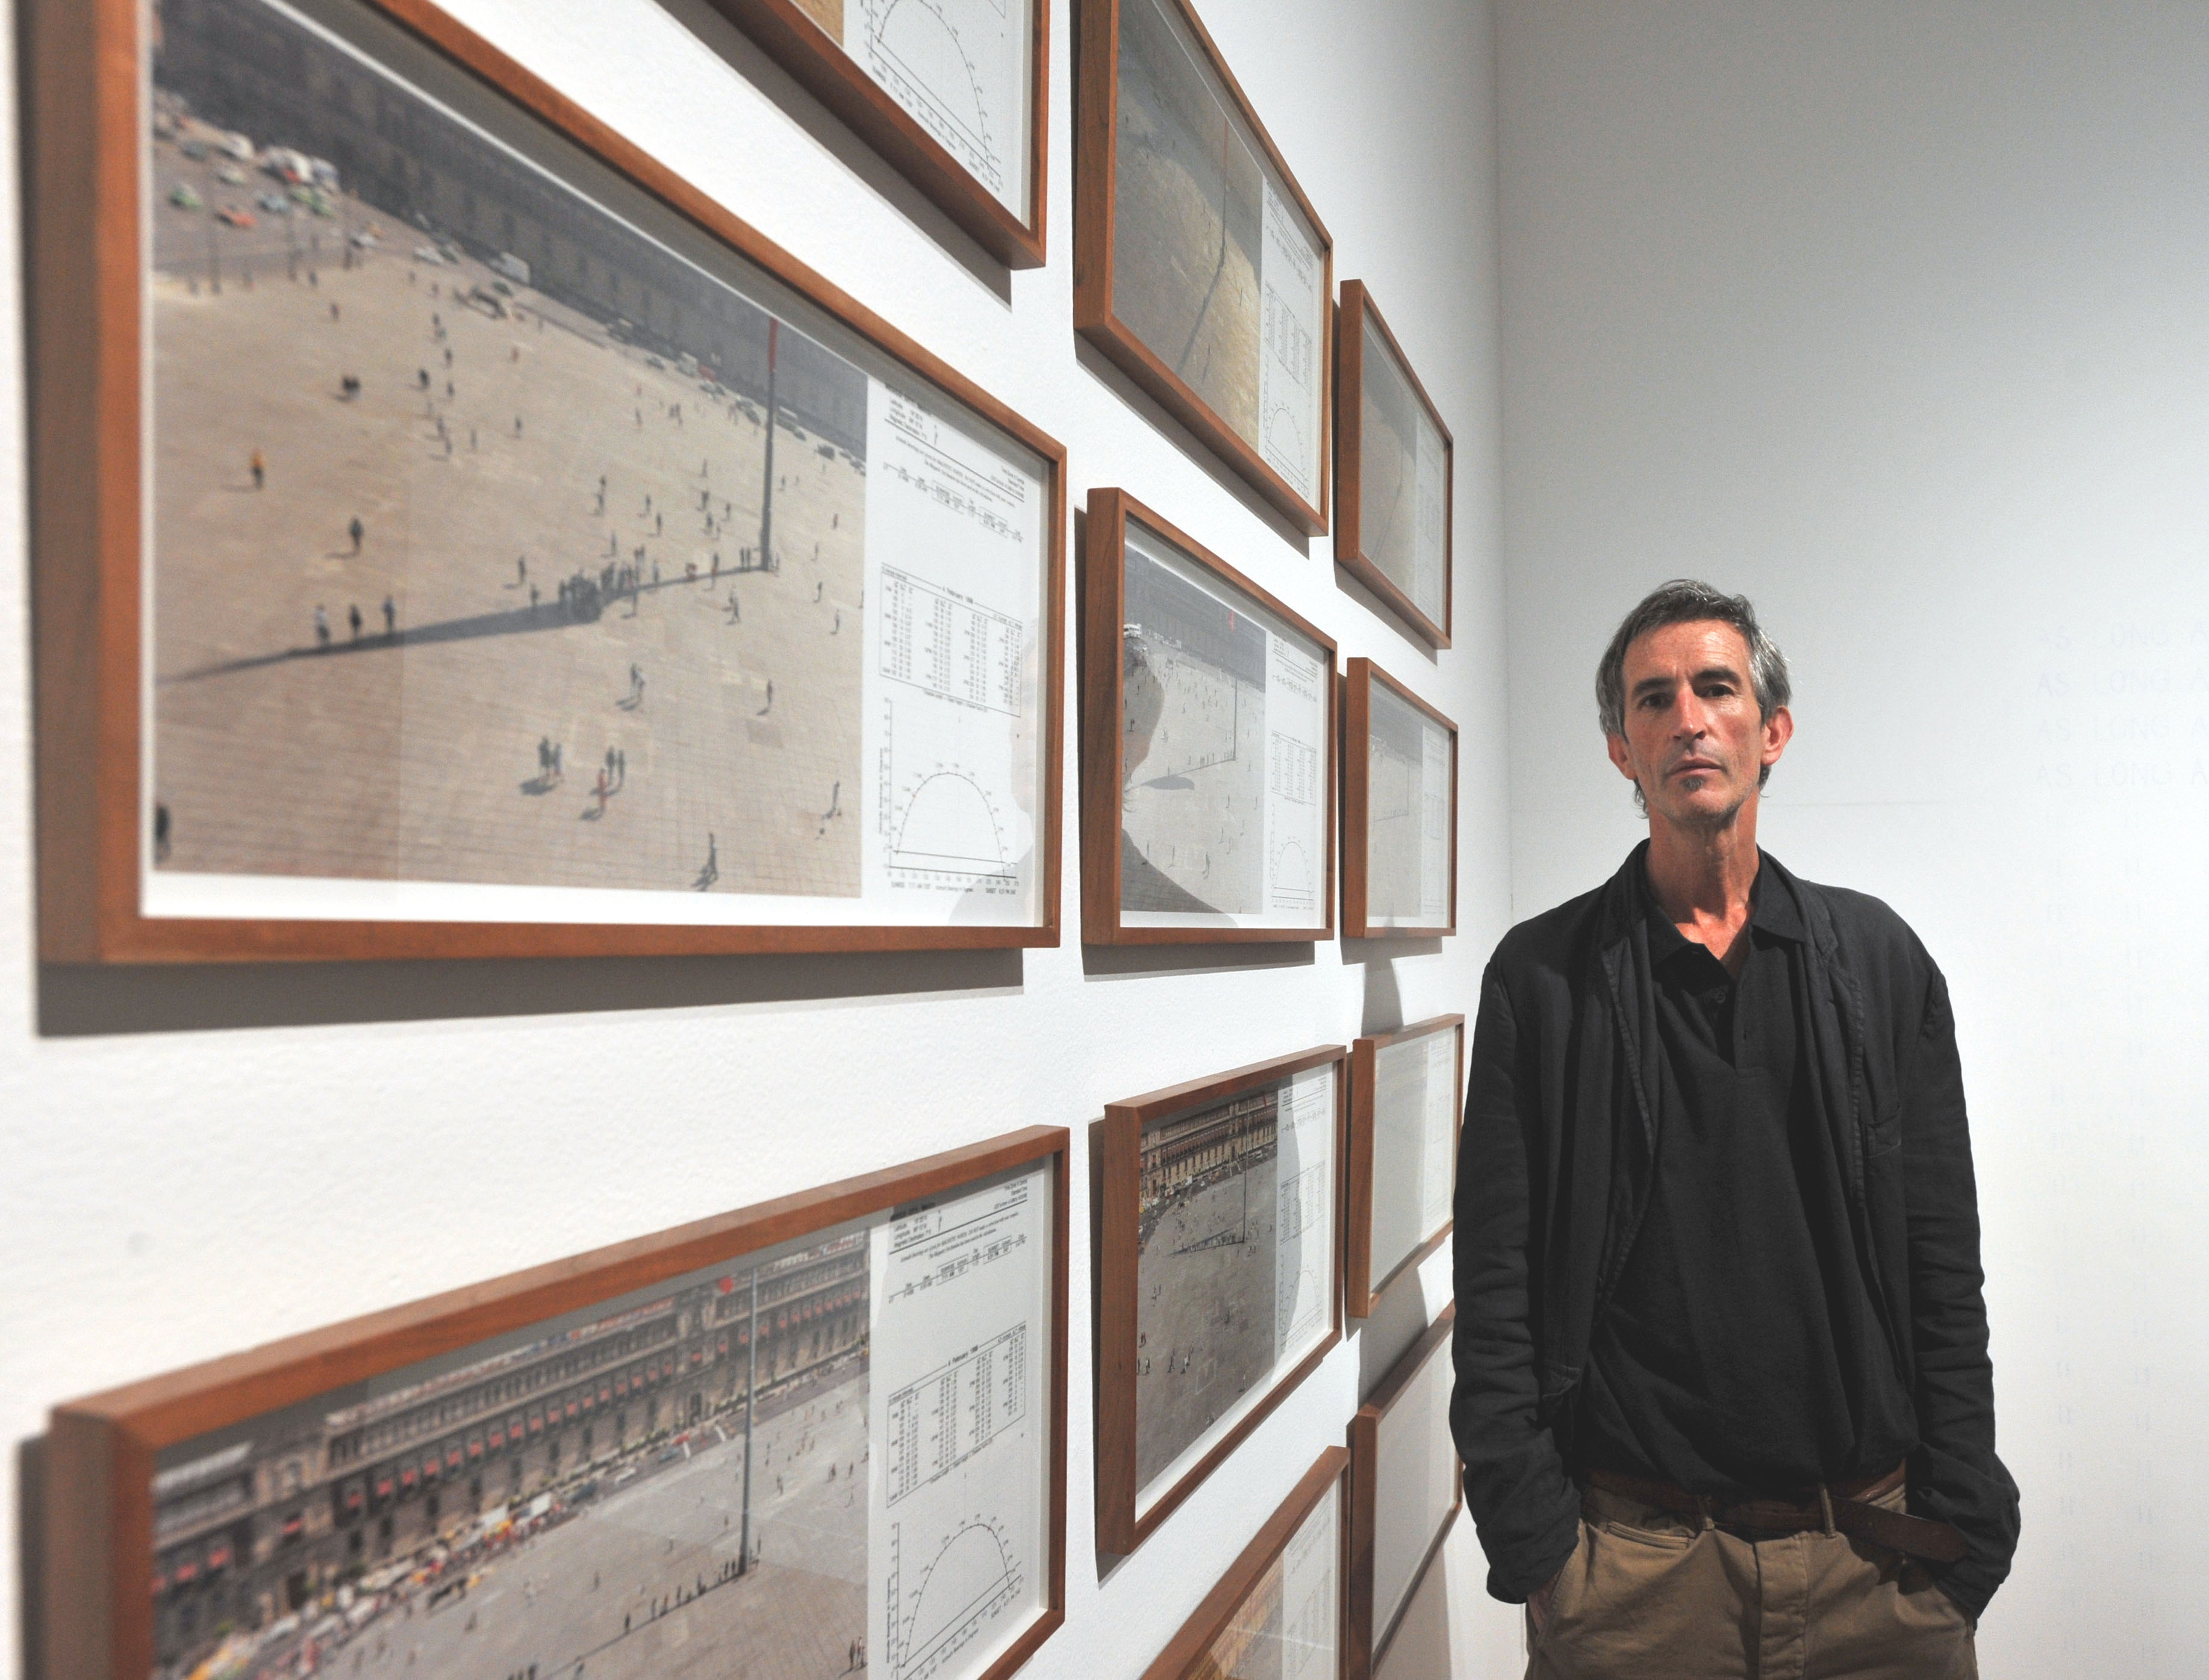 'Mexico Survey': Francis Alÿs stands by his work  'Time Lapse, Zócalo' (May 22, 1999, in collaboration with Rafael Ortega, Mexico City) at the Museum of Contemporary Art, Tokyo. | YOSHIAKI MIURA